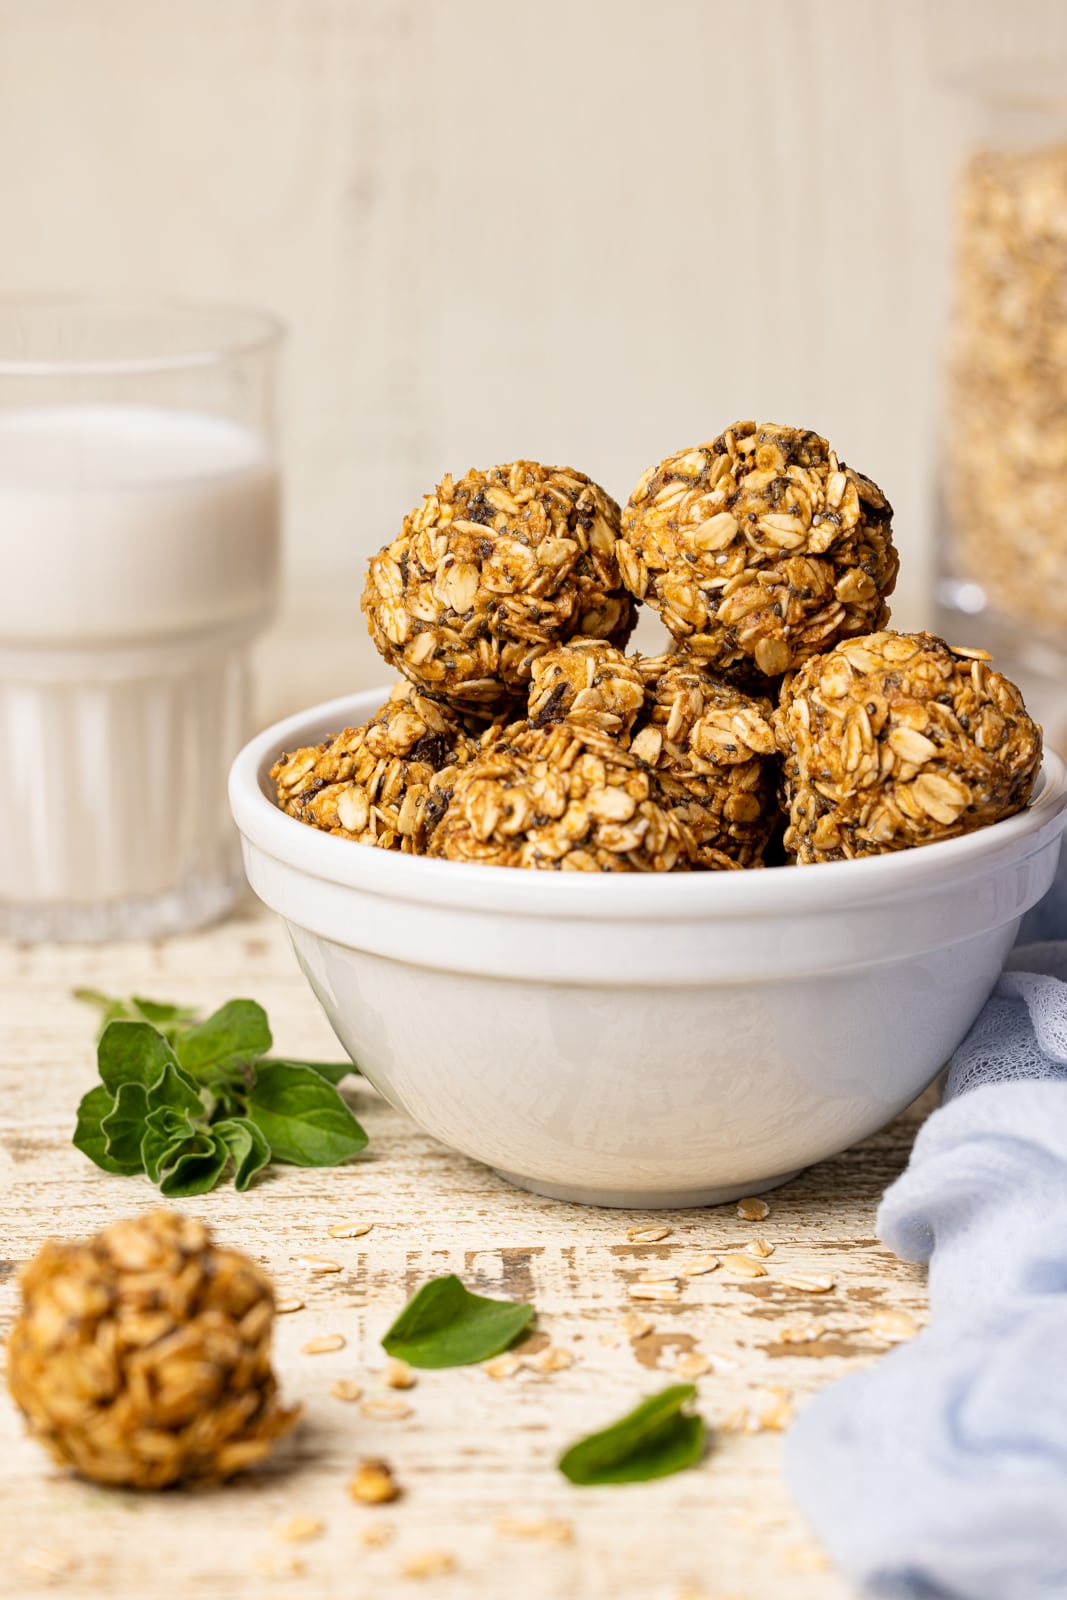 Protein balls in a white bowl stacked on a white wood table with a glass of milk and oats.